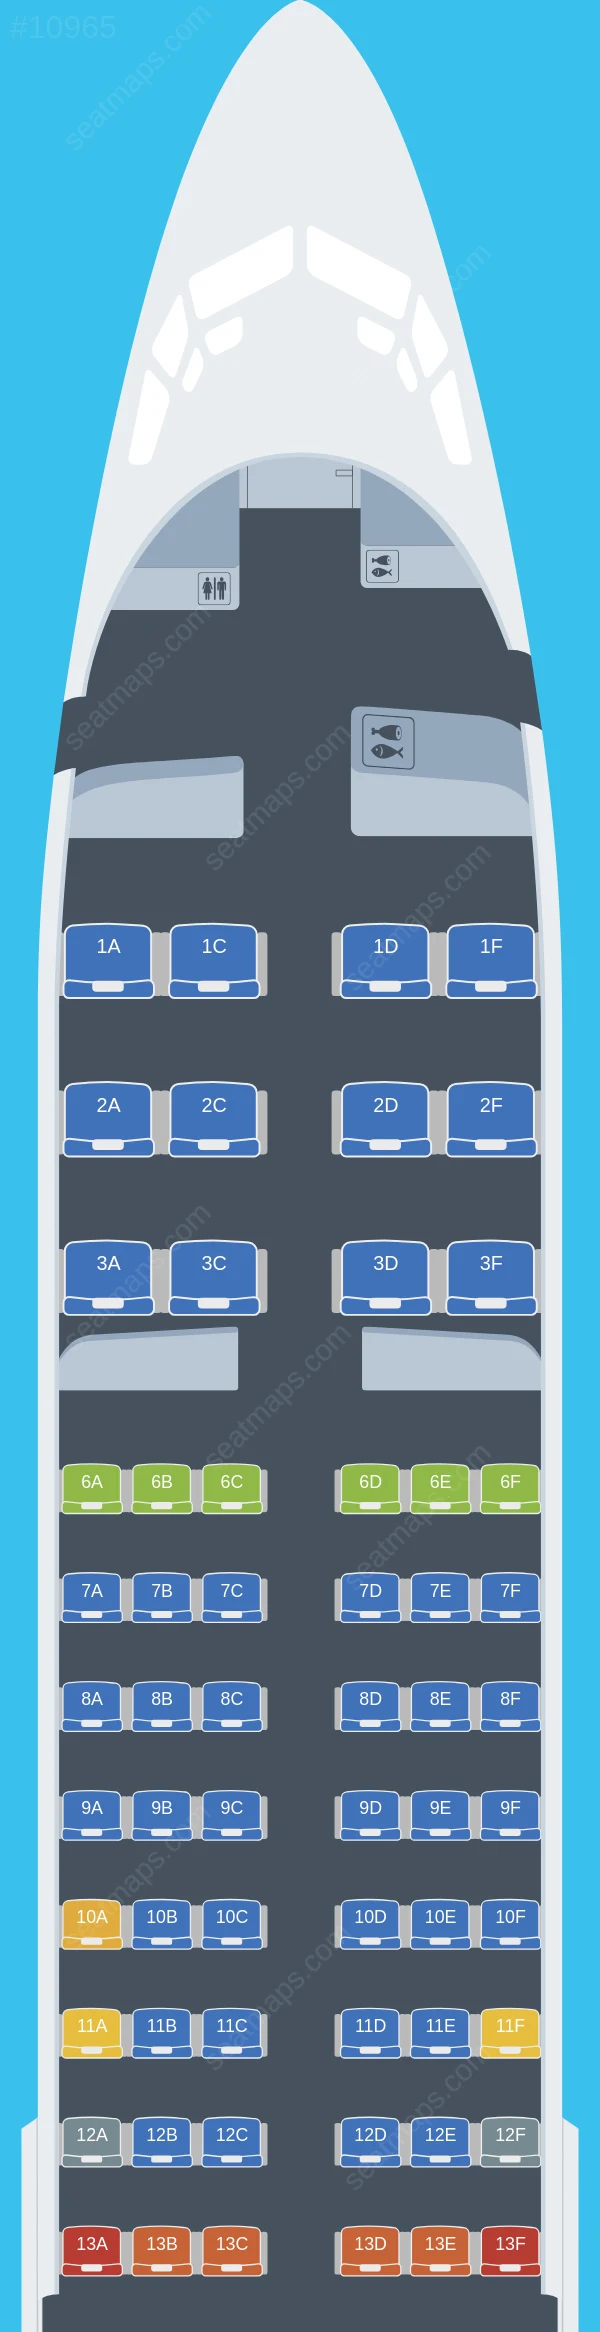 Luxair Boeing 737-800 V.1 seatmap preview